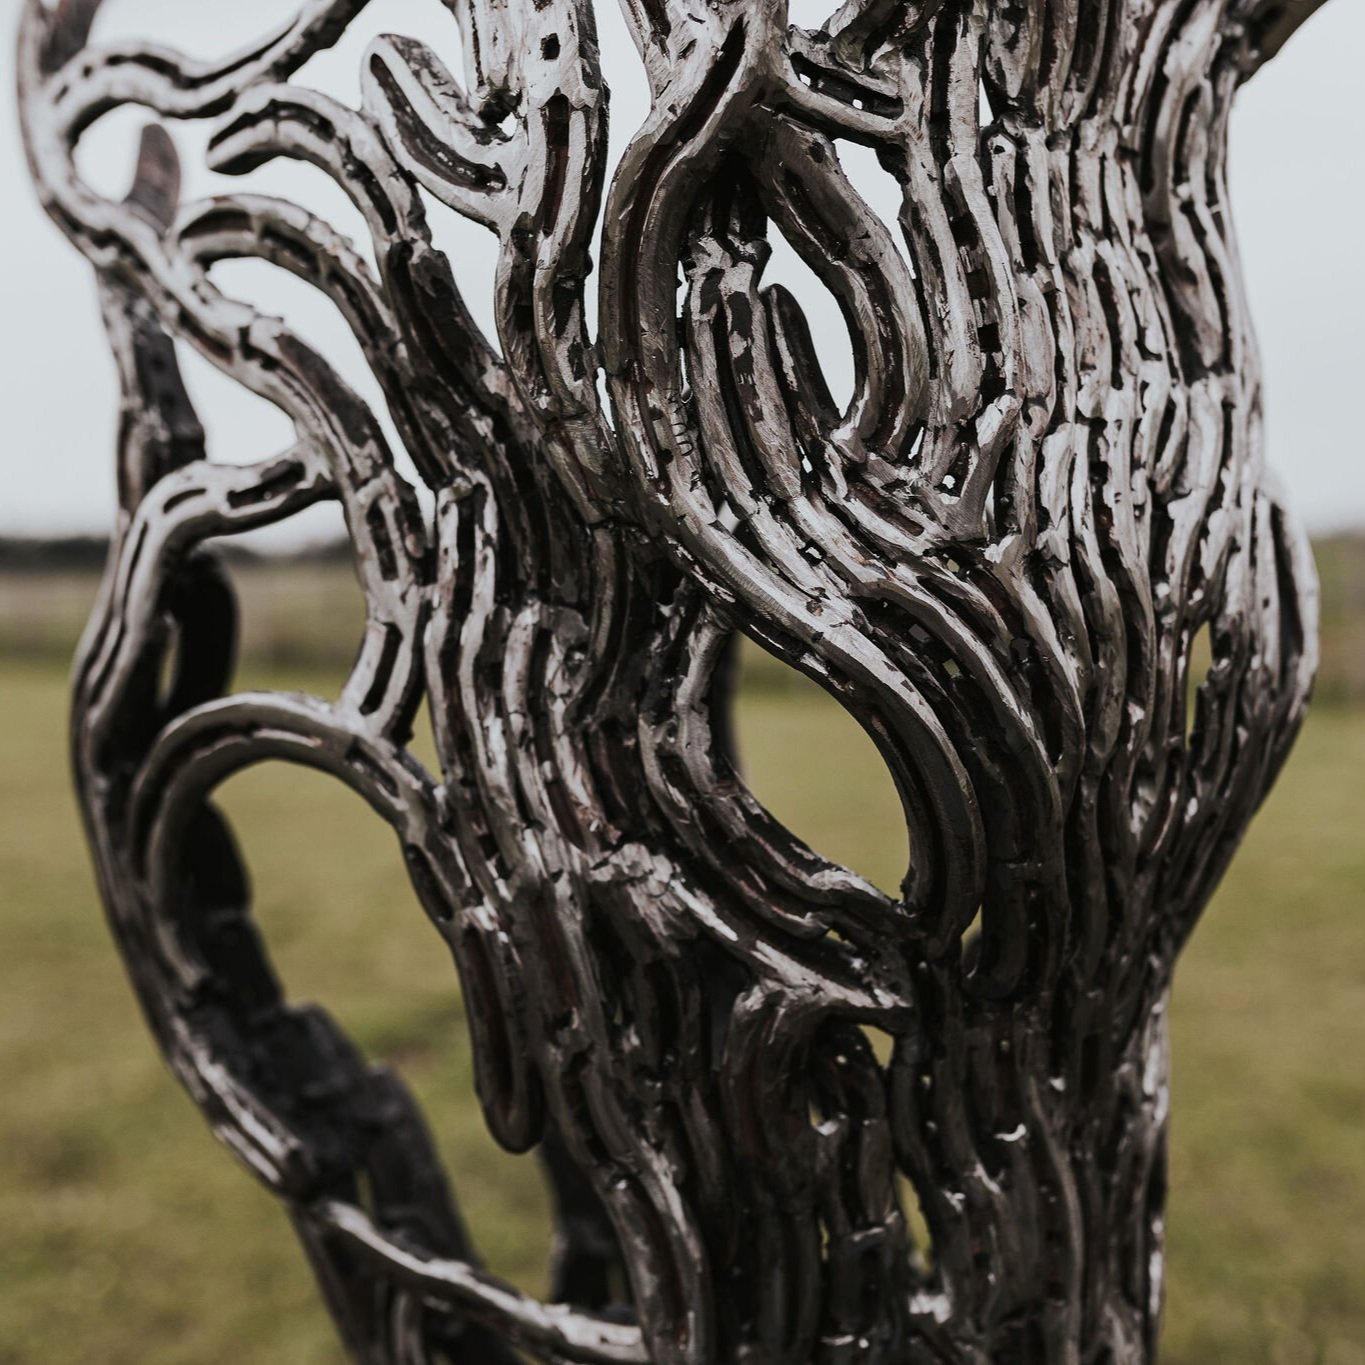 Grazing Horse sculpture made from horseshoes, Close up